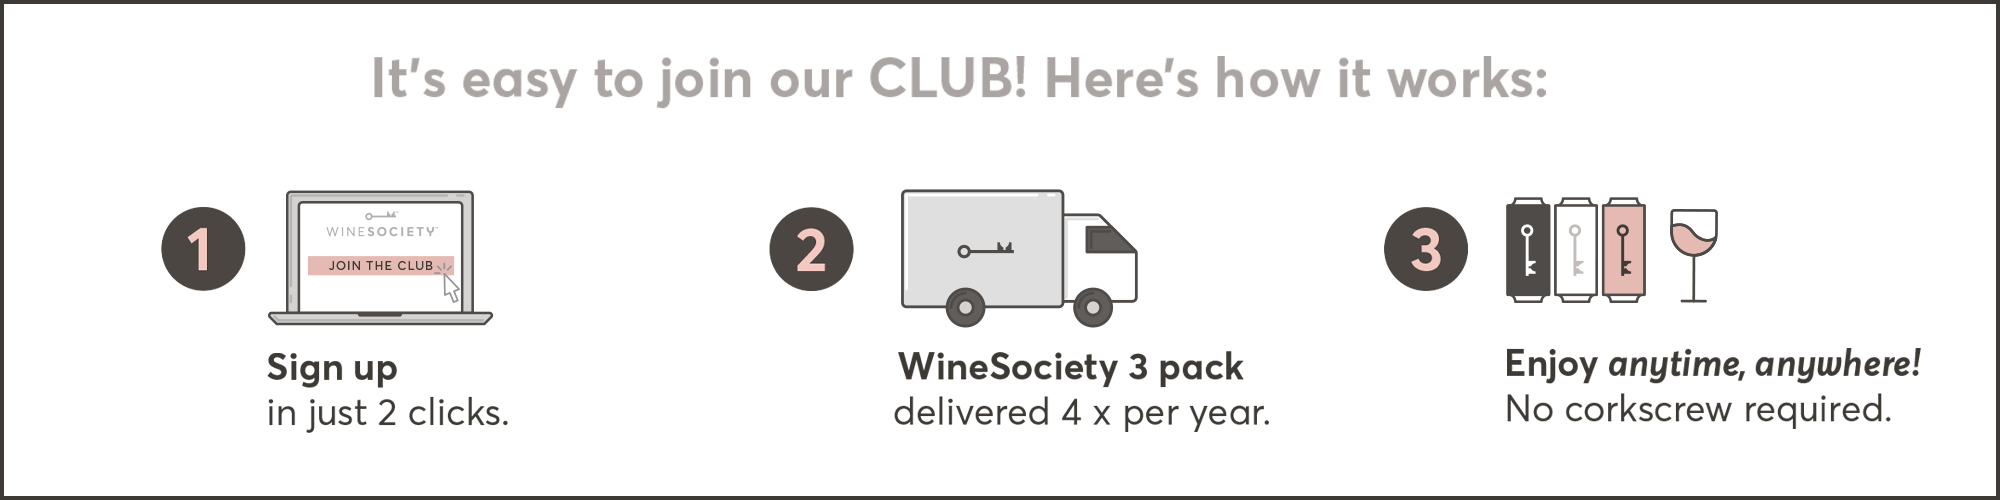 Join CLUB WineSociety